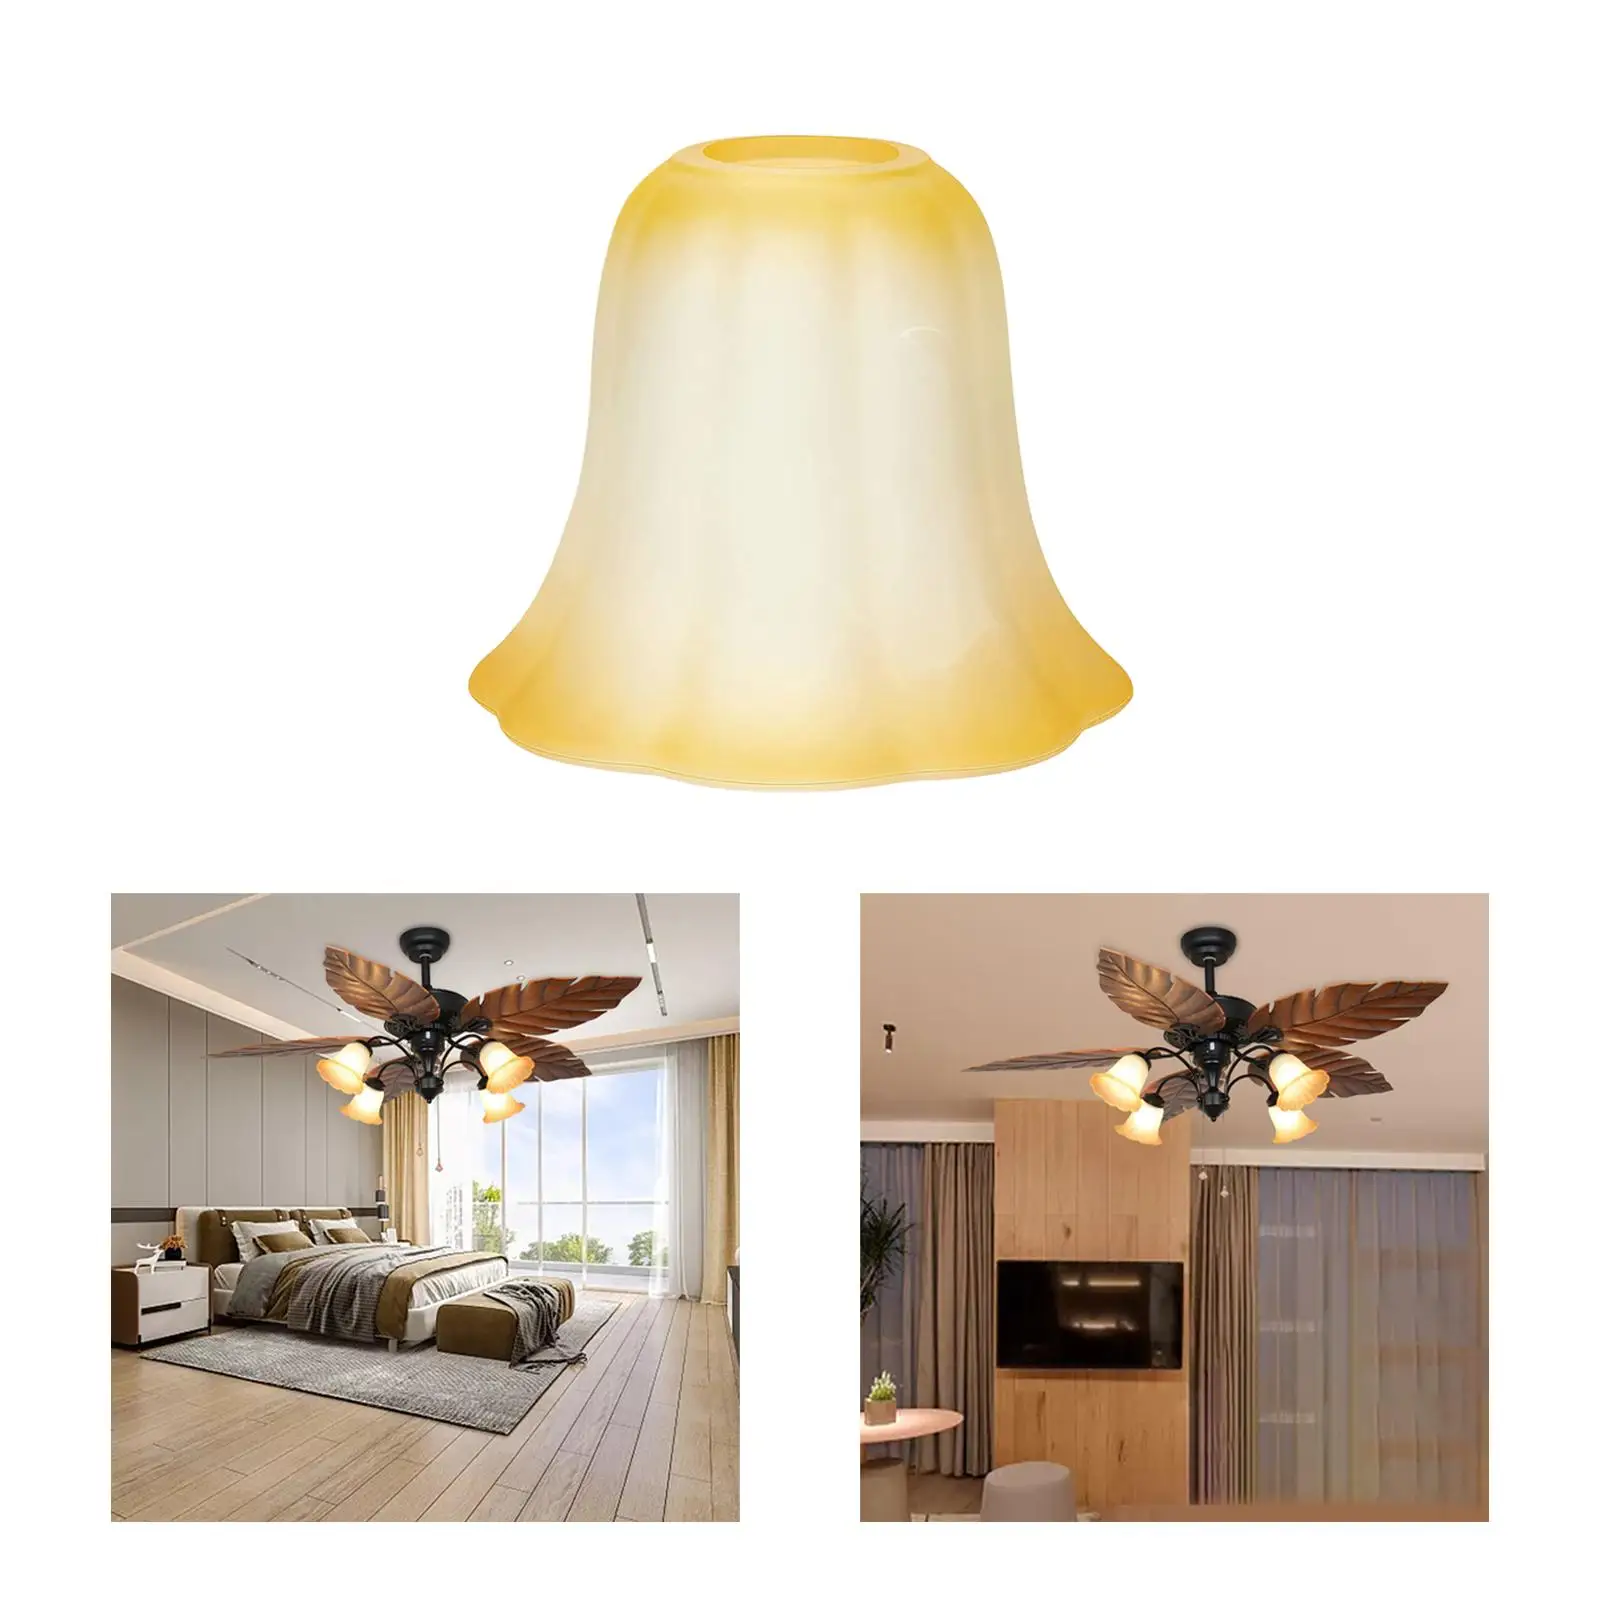 Ceiling Light Fixture Cover Lighting Accessories Frost Glass Lamp Shade for Droplight Nursery